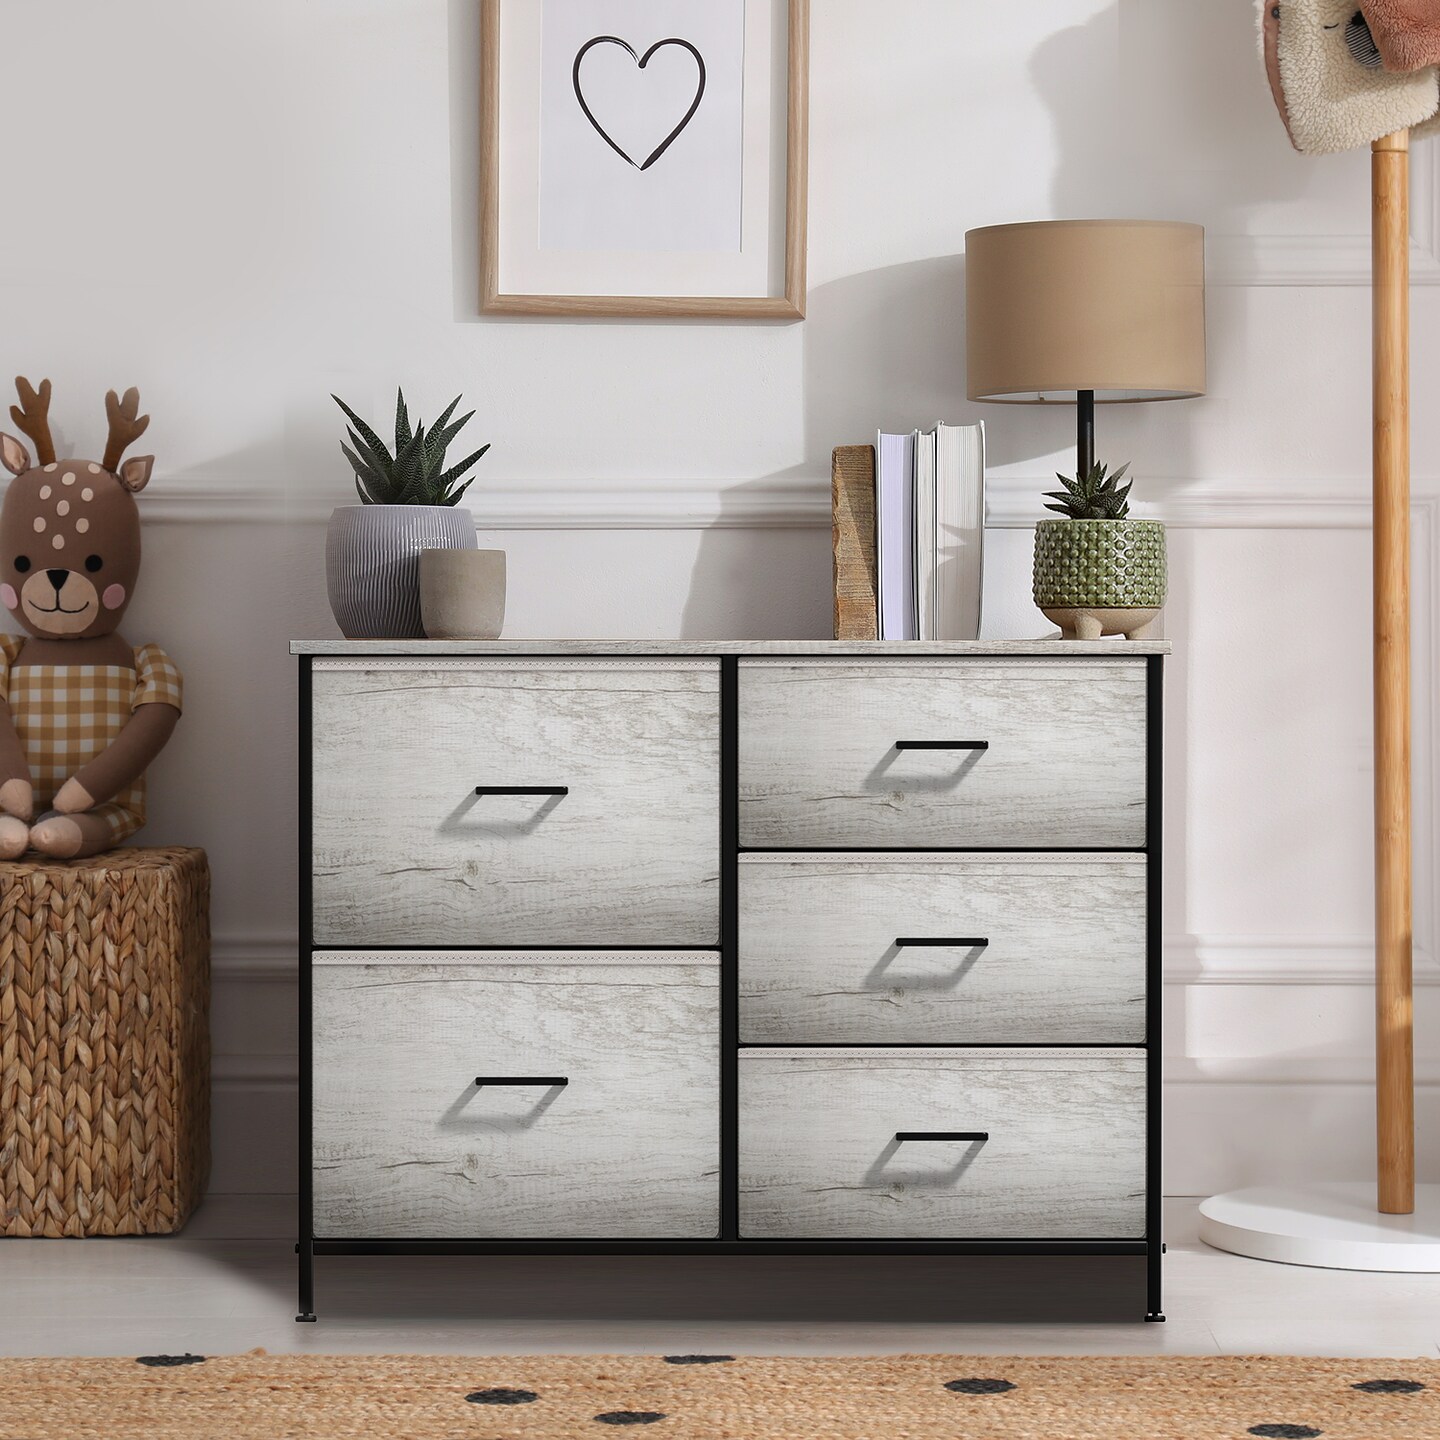 Sorbus Dresser with 5 Drawers - Storage Chest Organizer with Steel Frame, Wood Top, Handles, Fabric Bins